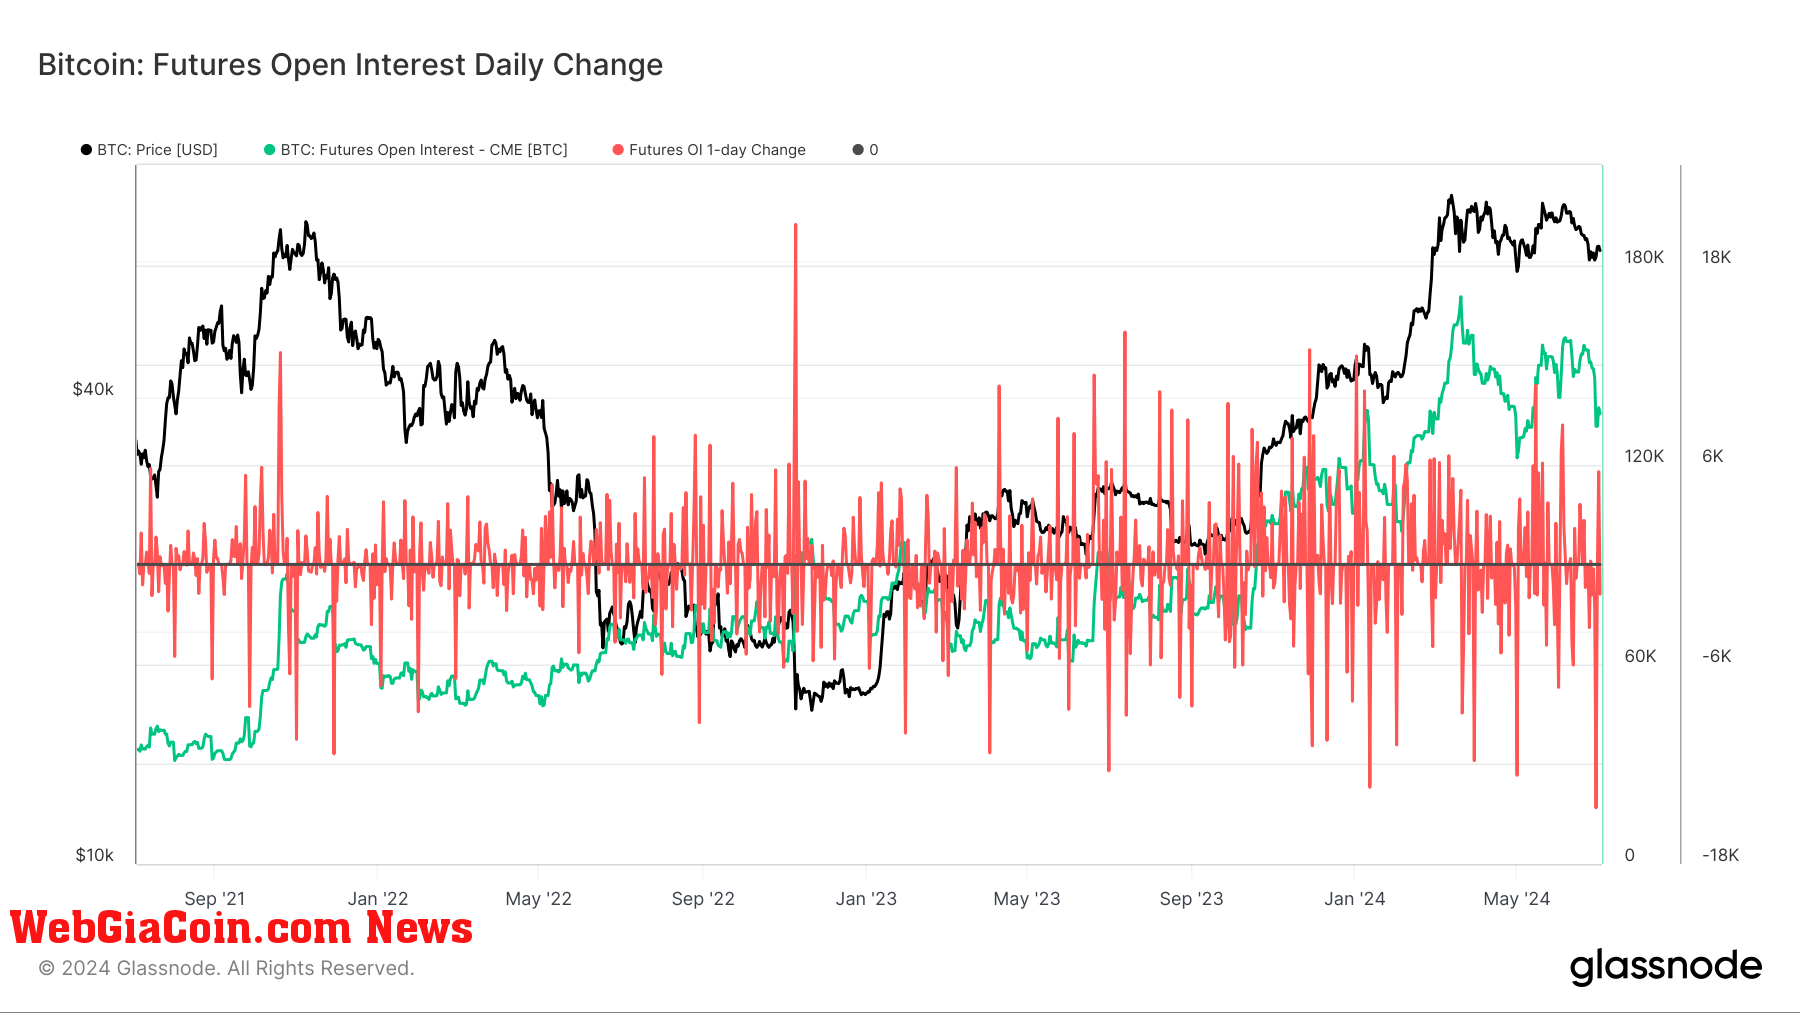 Bitcoin: Futures Open Interest Daily Change: (Source: Glassnode)